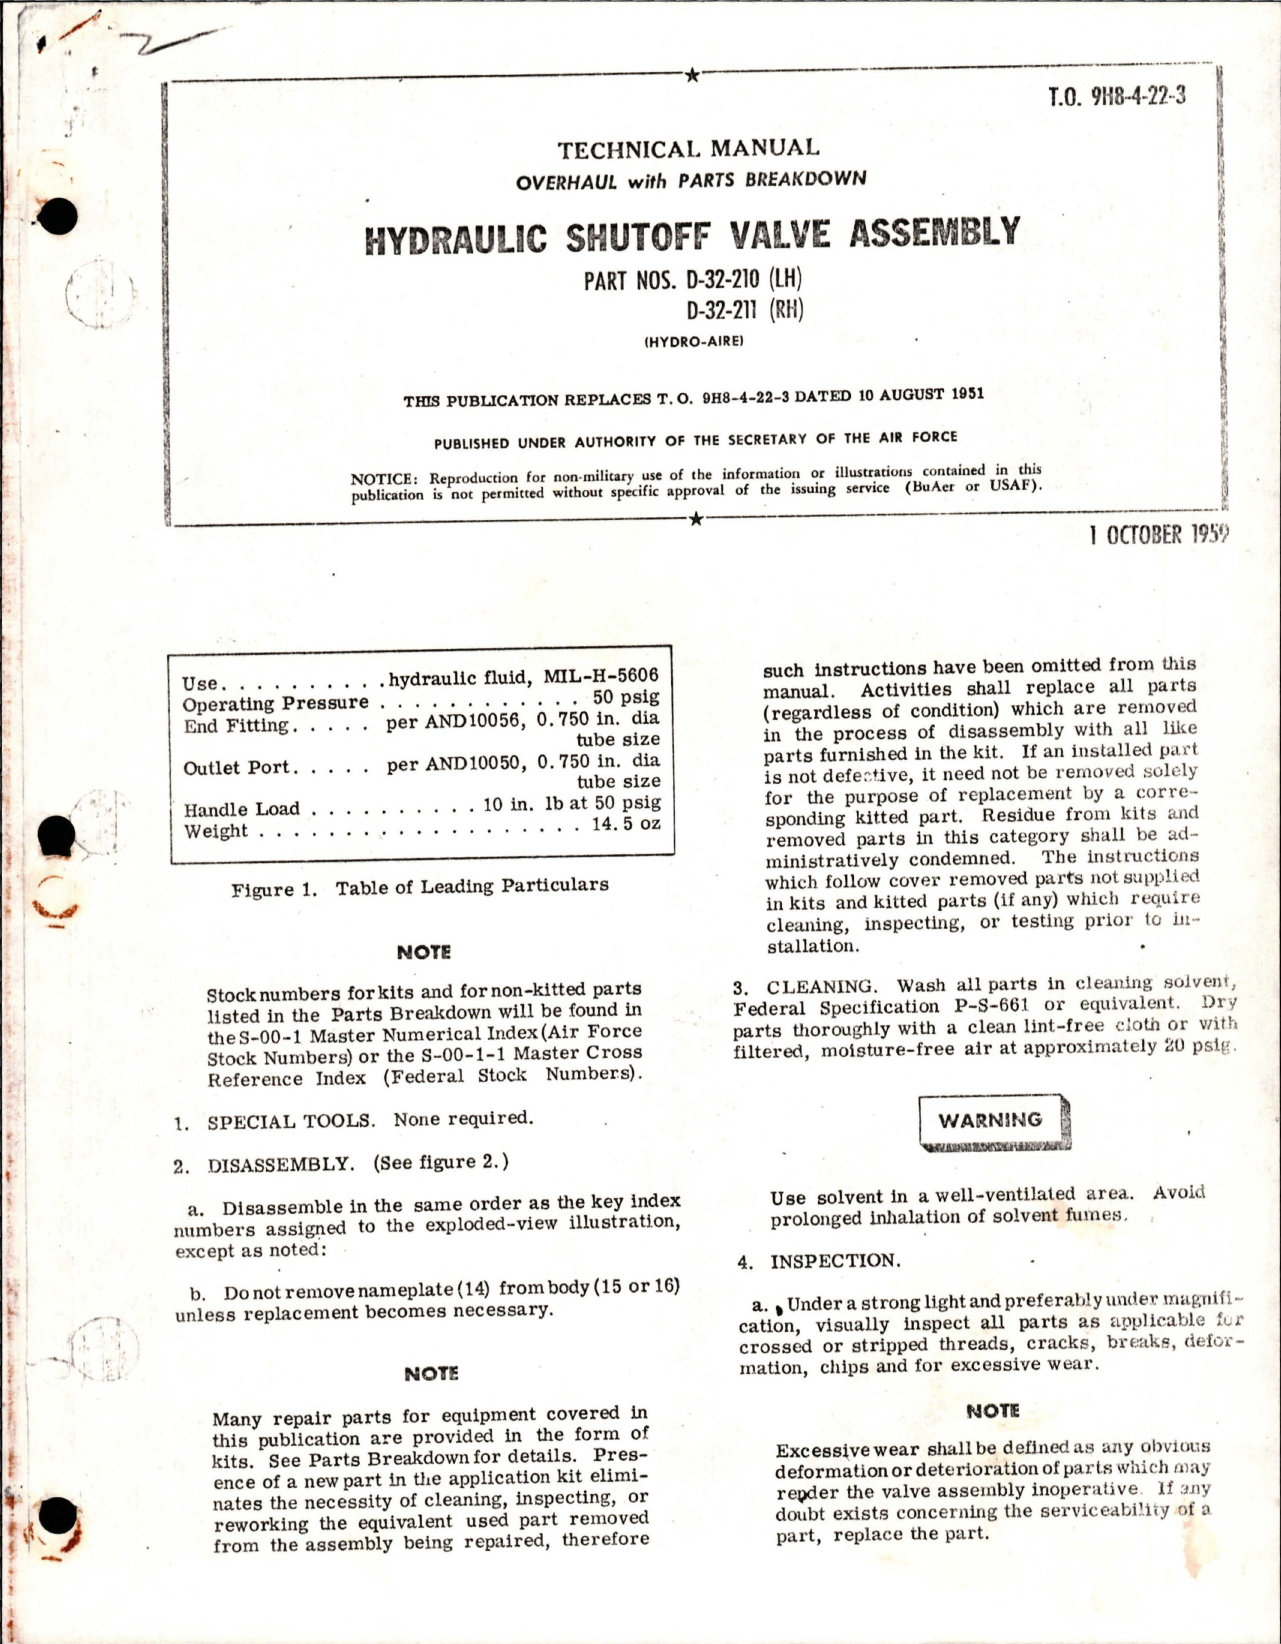 Sample page 1 from AirCorps Library document: Overhaul with Parts Breakdown for Hydraulic Shutoff Valve Assy - Parts D-32-210 (LH), D-32-211 (RH)